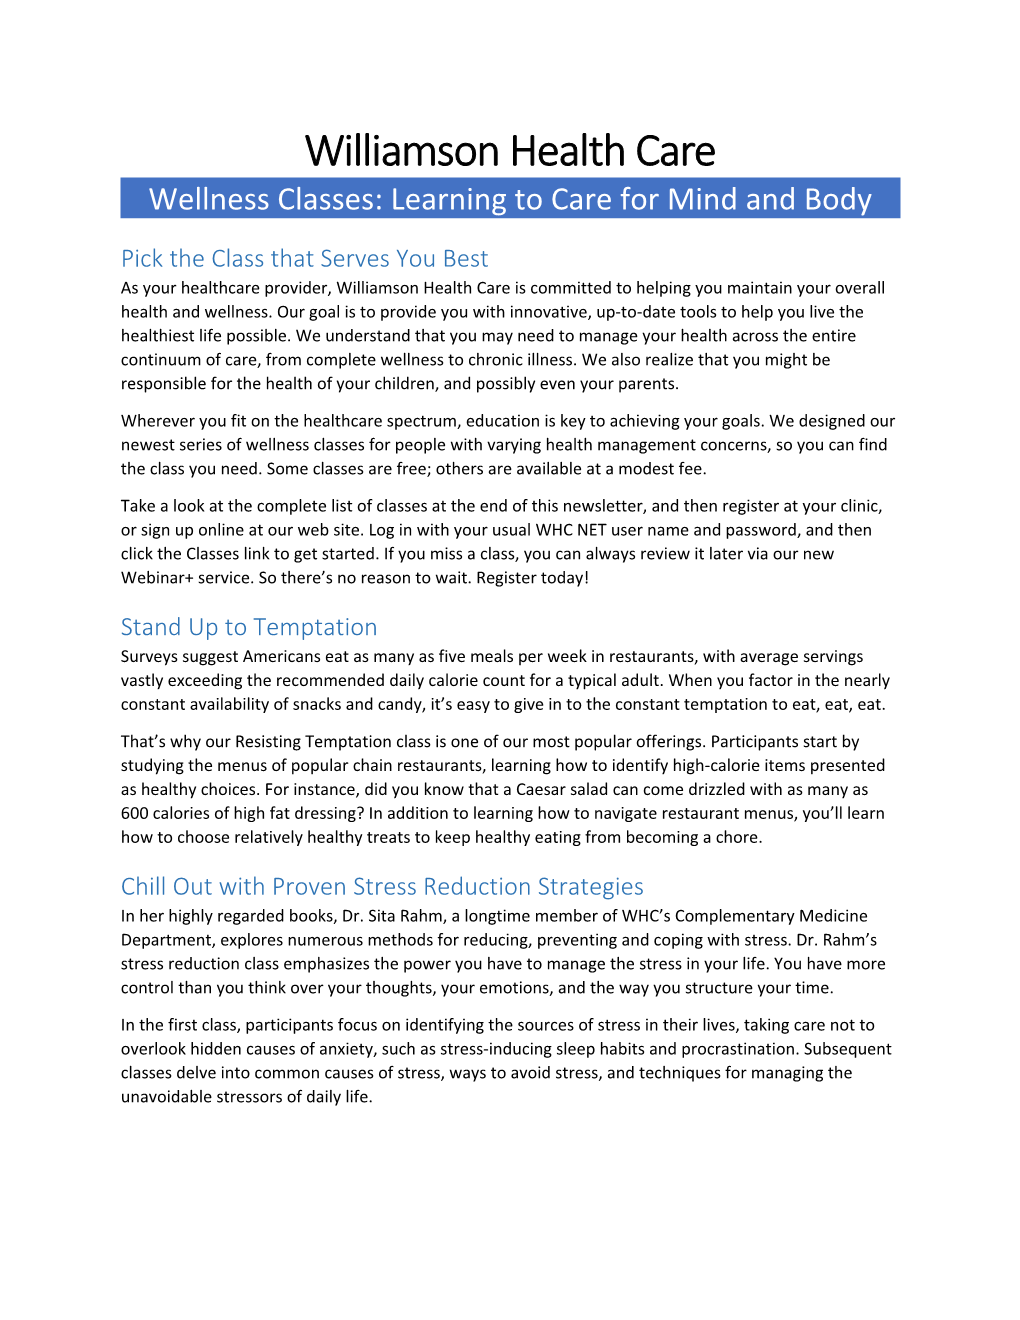 Wellness Classes: Learning to Care for Mind and Body